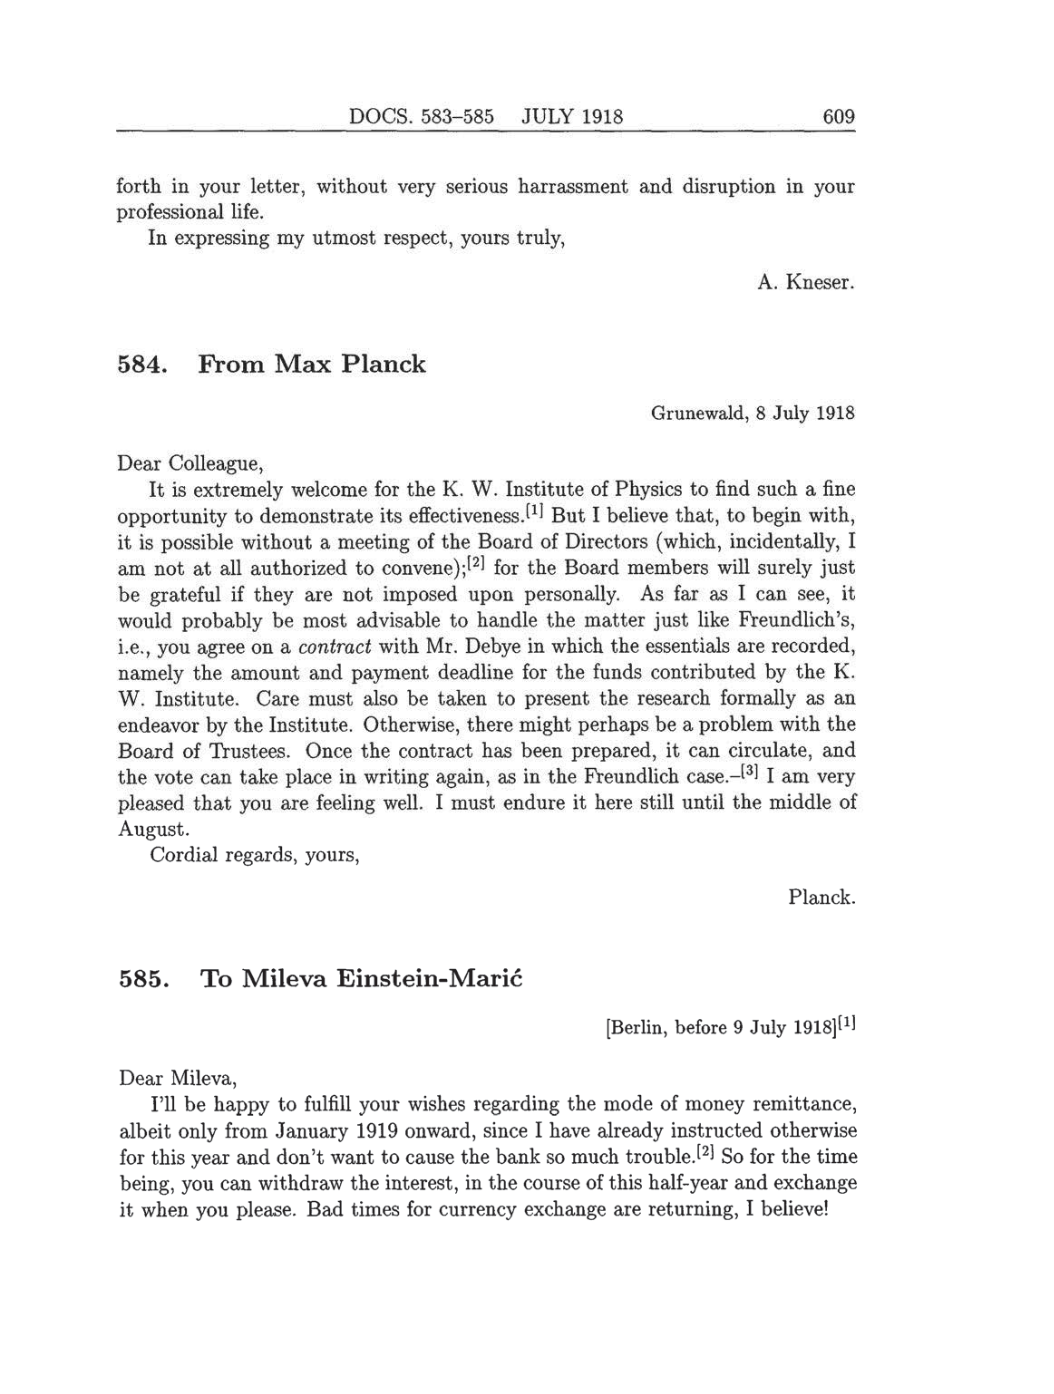 Volume 8: The Berlin Years: Correspondence, 1914-1918 (English translation supplement) page 609